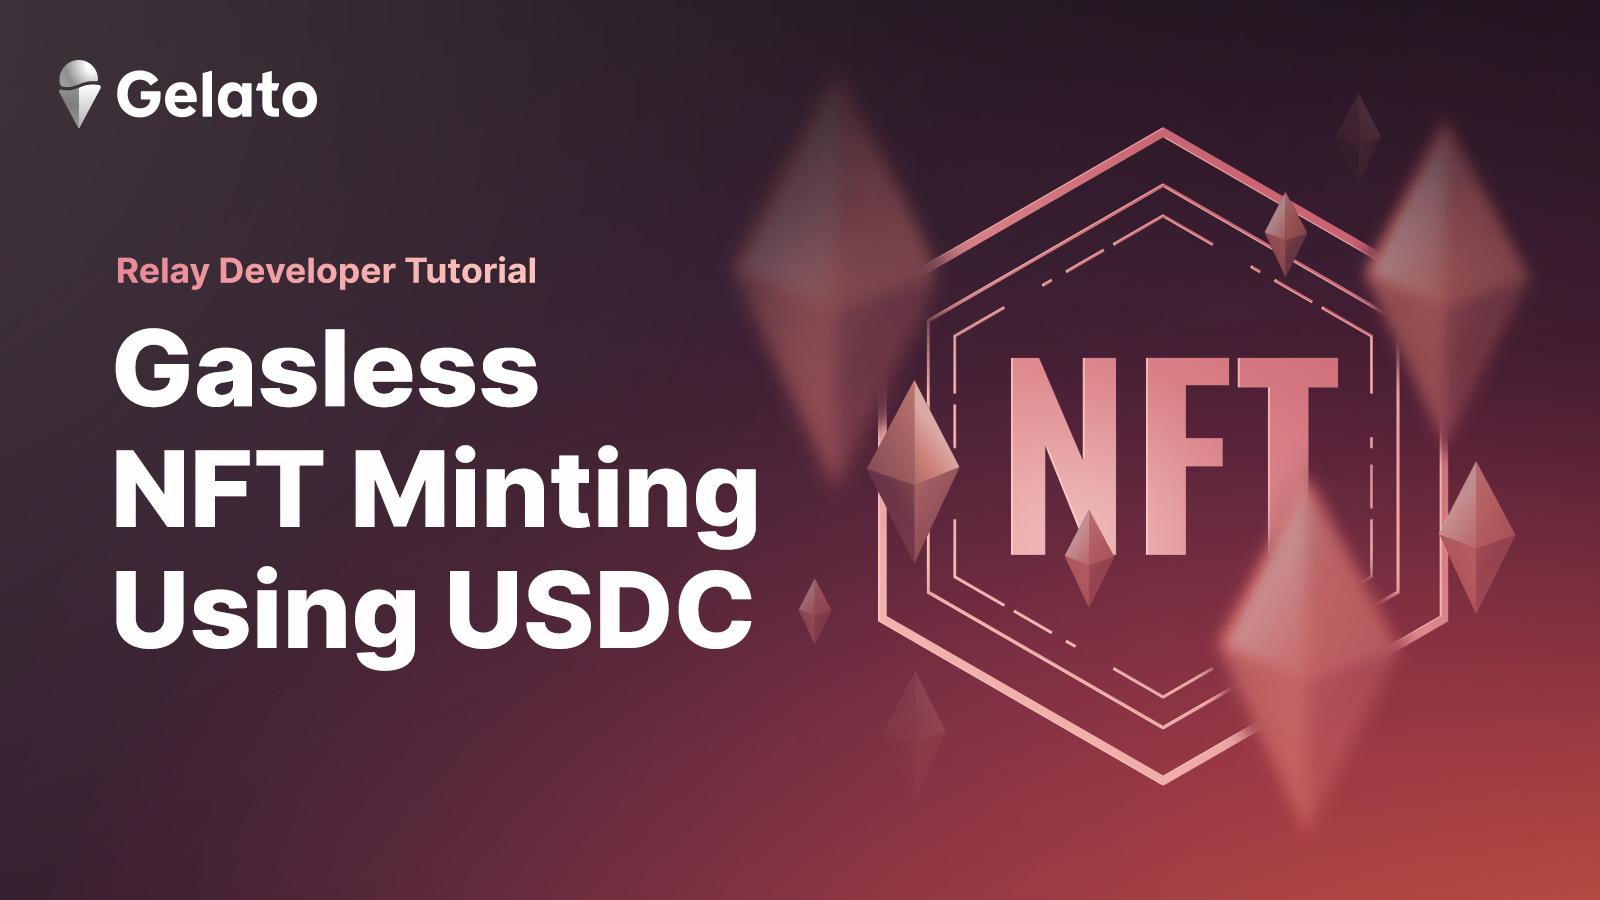 Gasless NFT Minting Using USDC: Powered by Gelato Relay